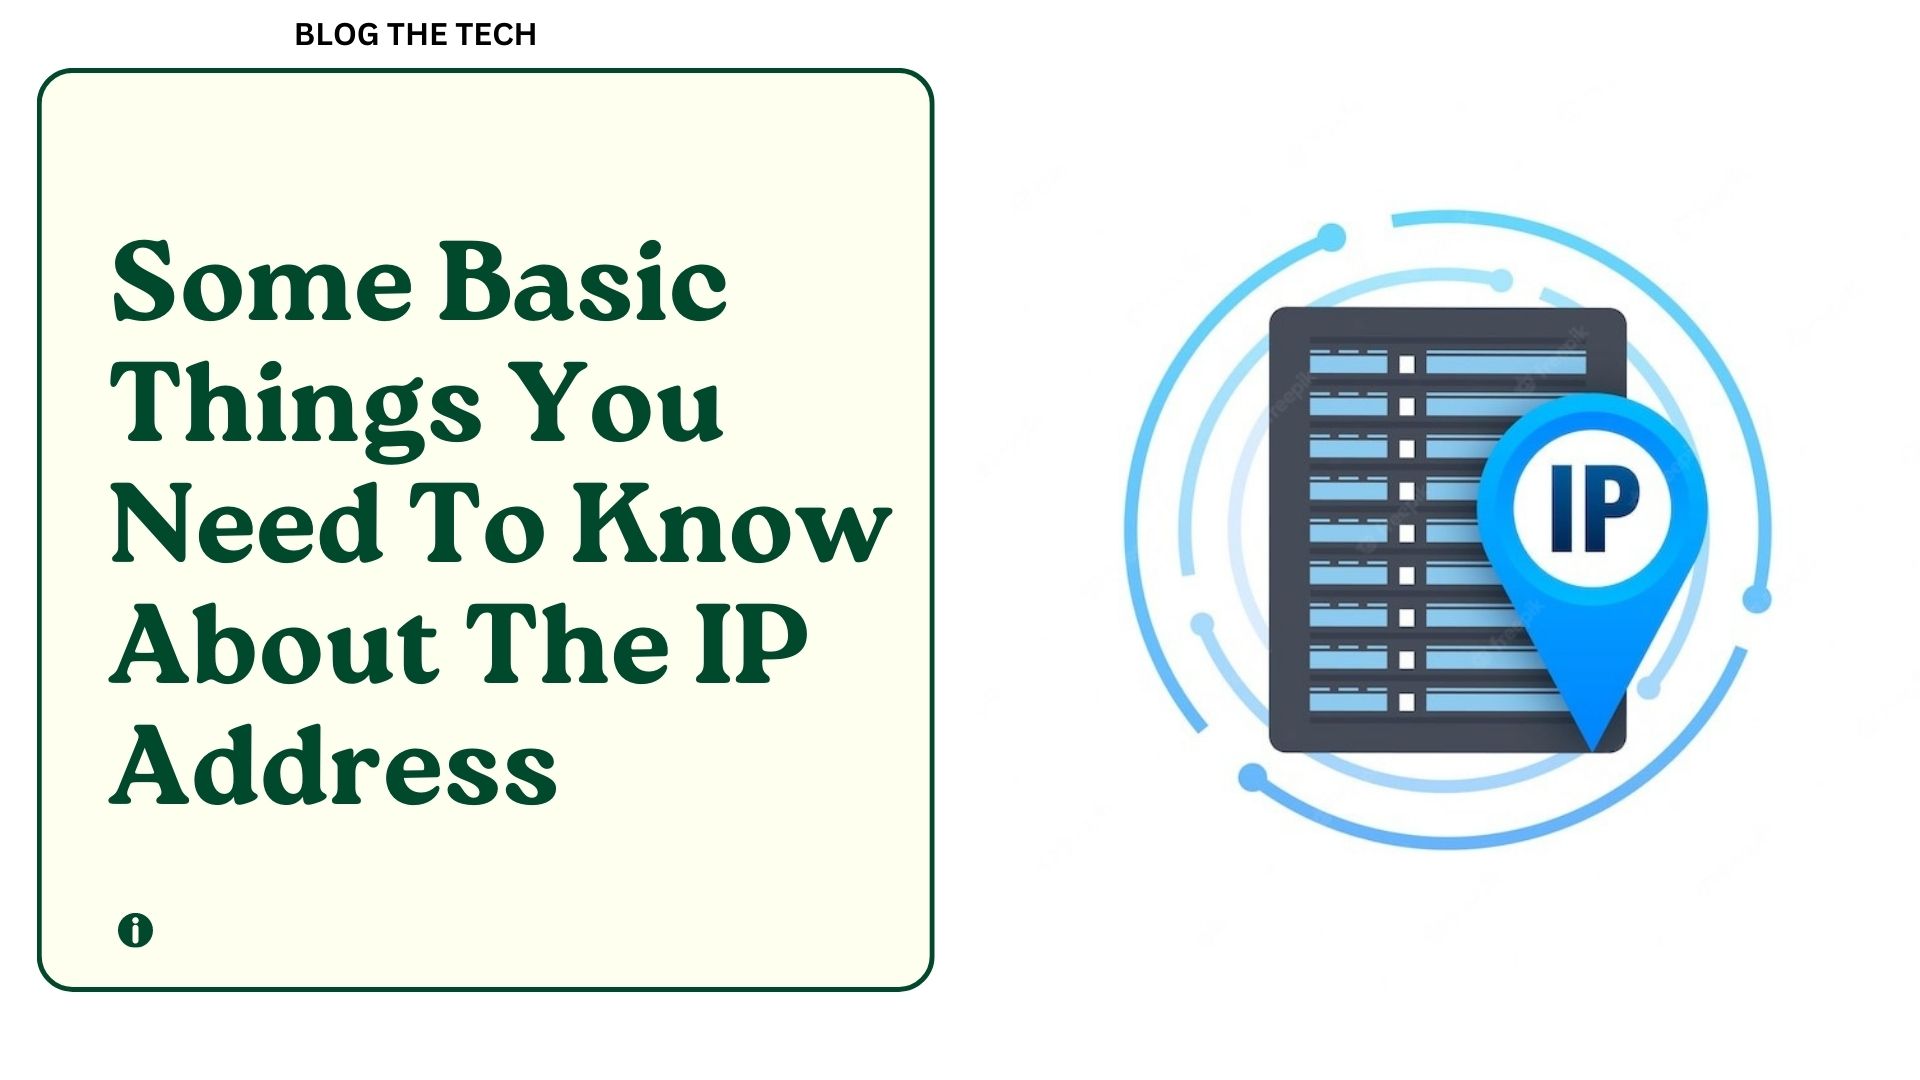 basic-things-to-know-about-the-ip-address-featured